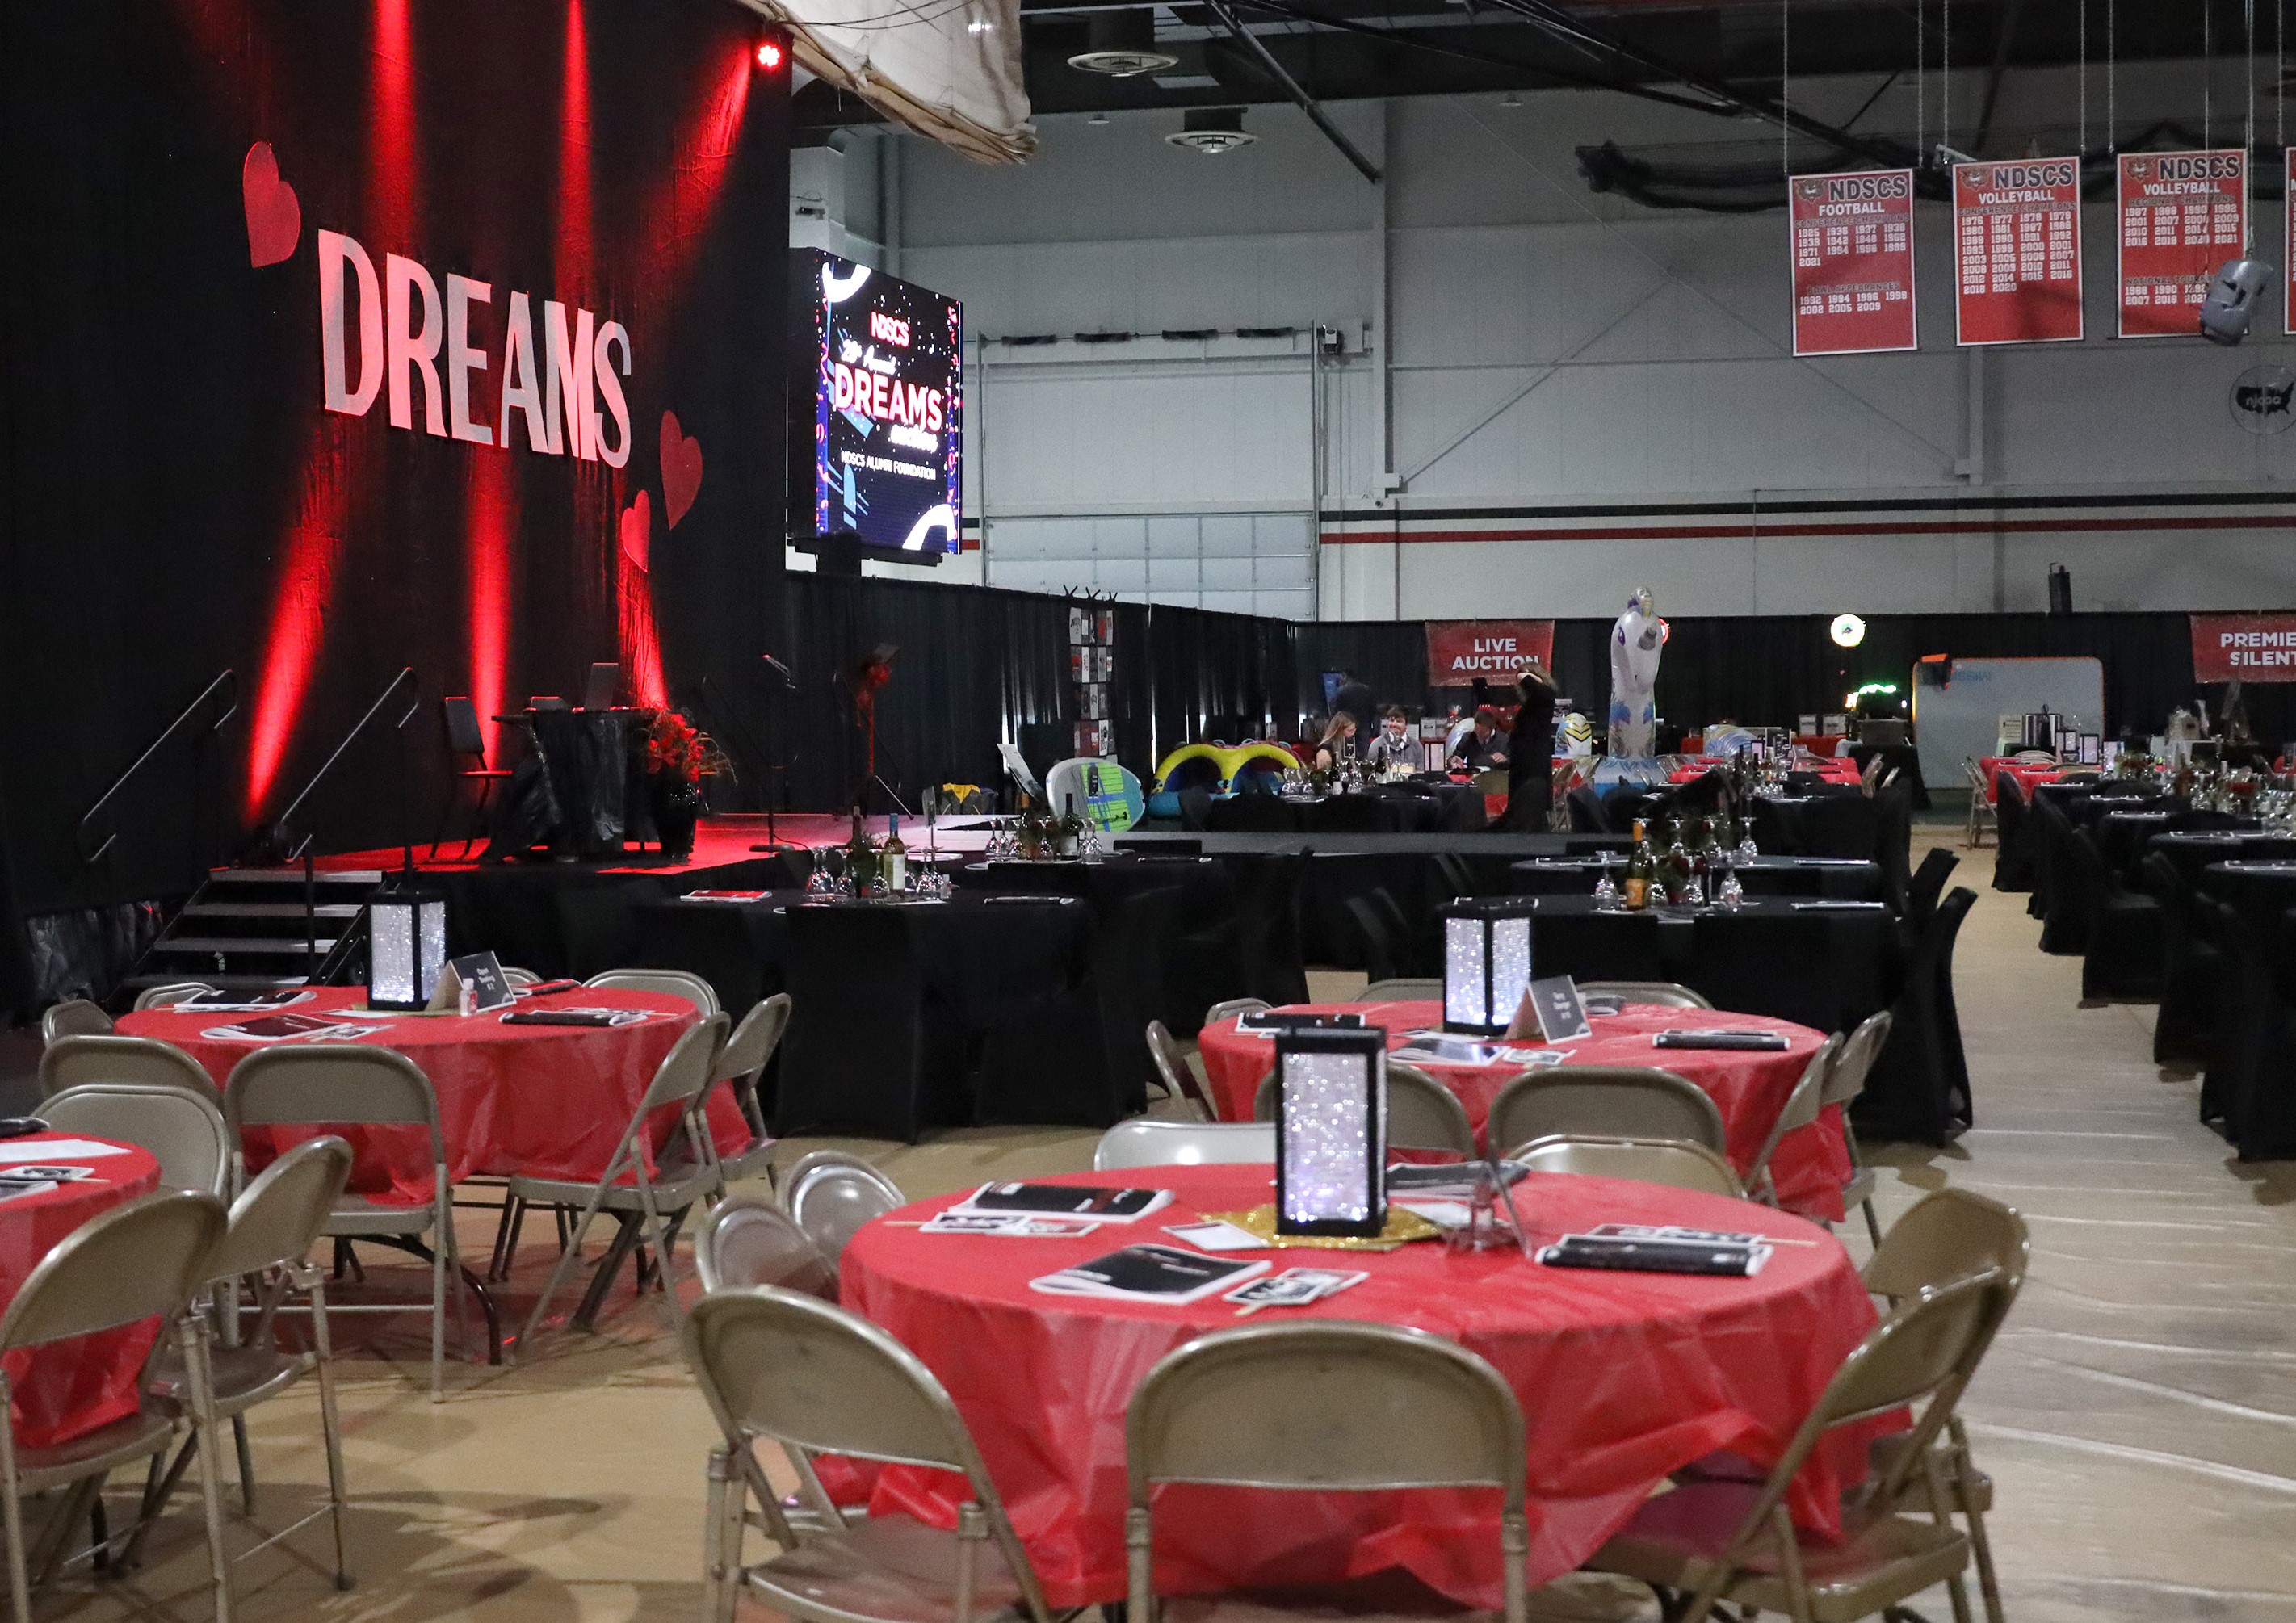 view of DREAMS tables and stage